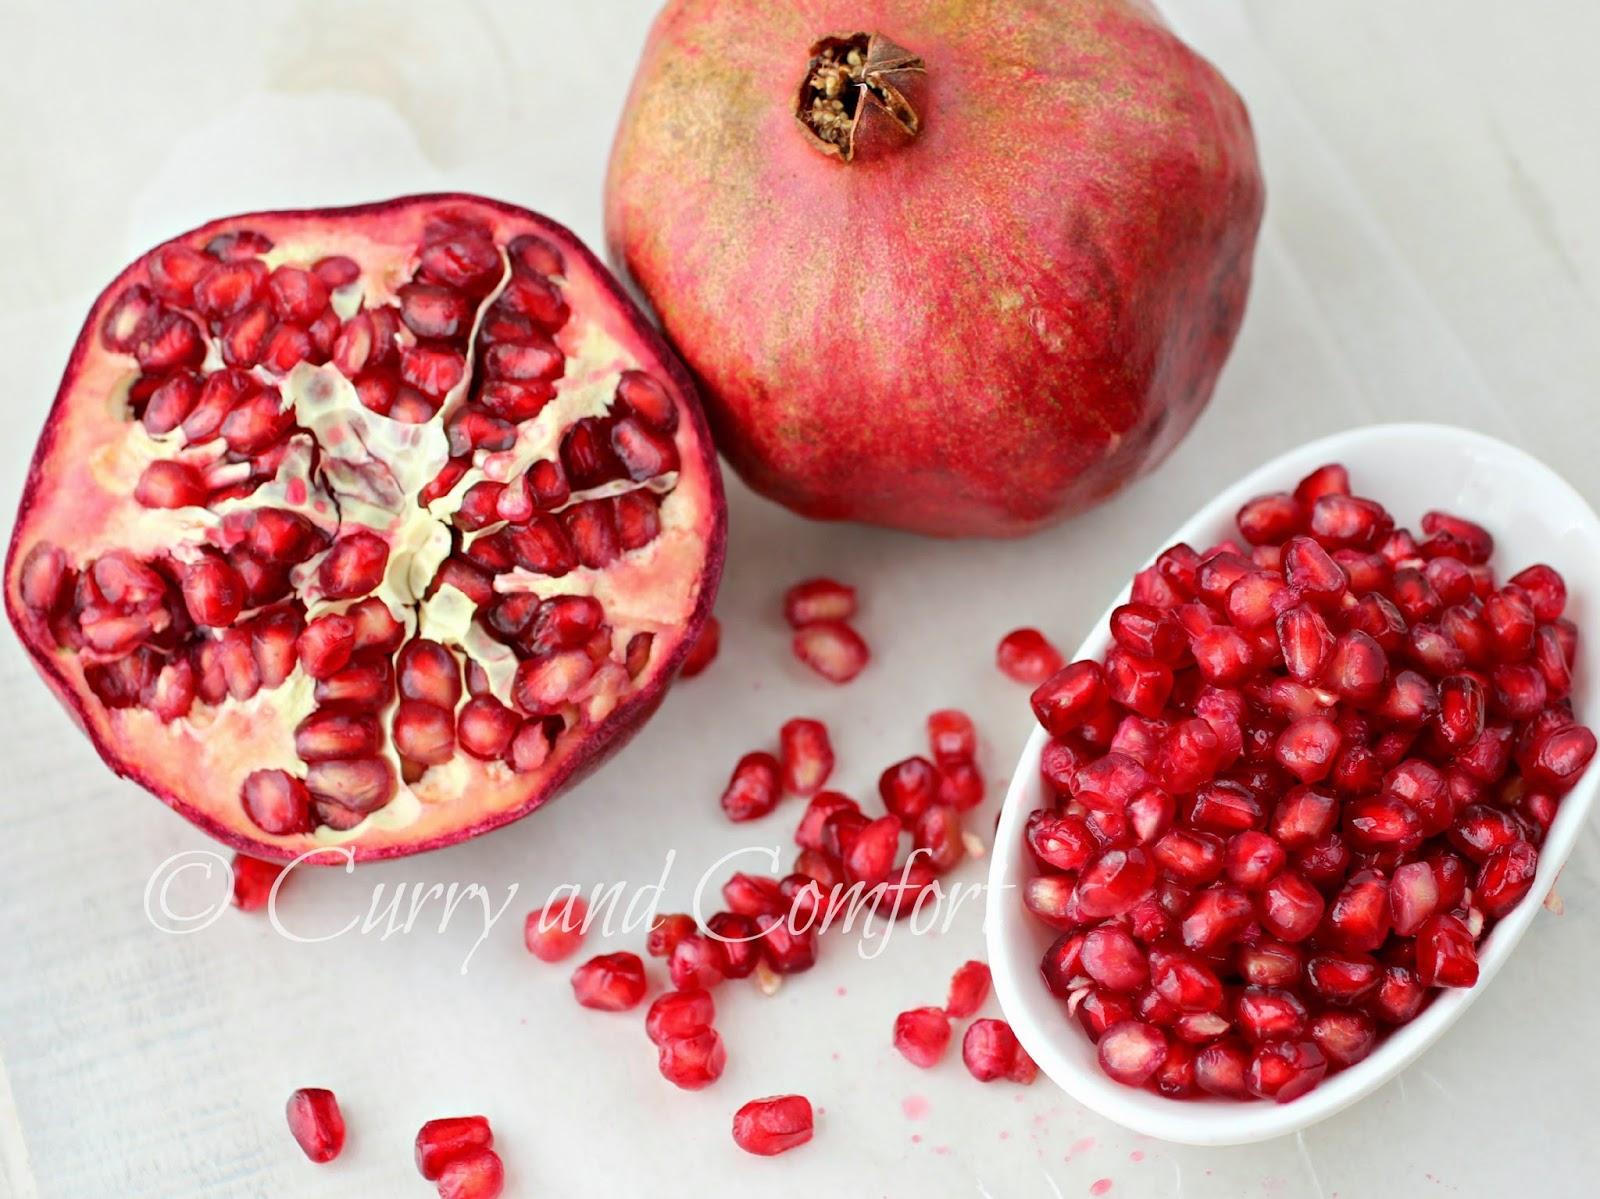 The best way to open a pomegranate and get all those delicious fresh p, How To Eat Pomegranate